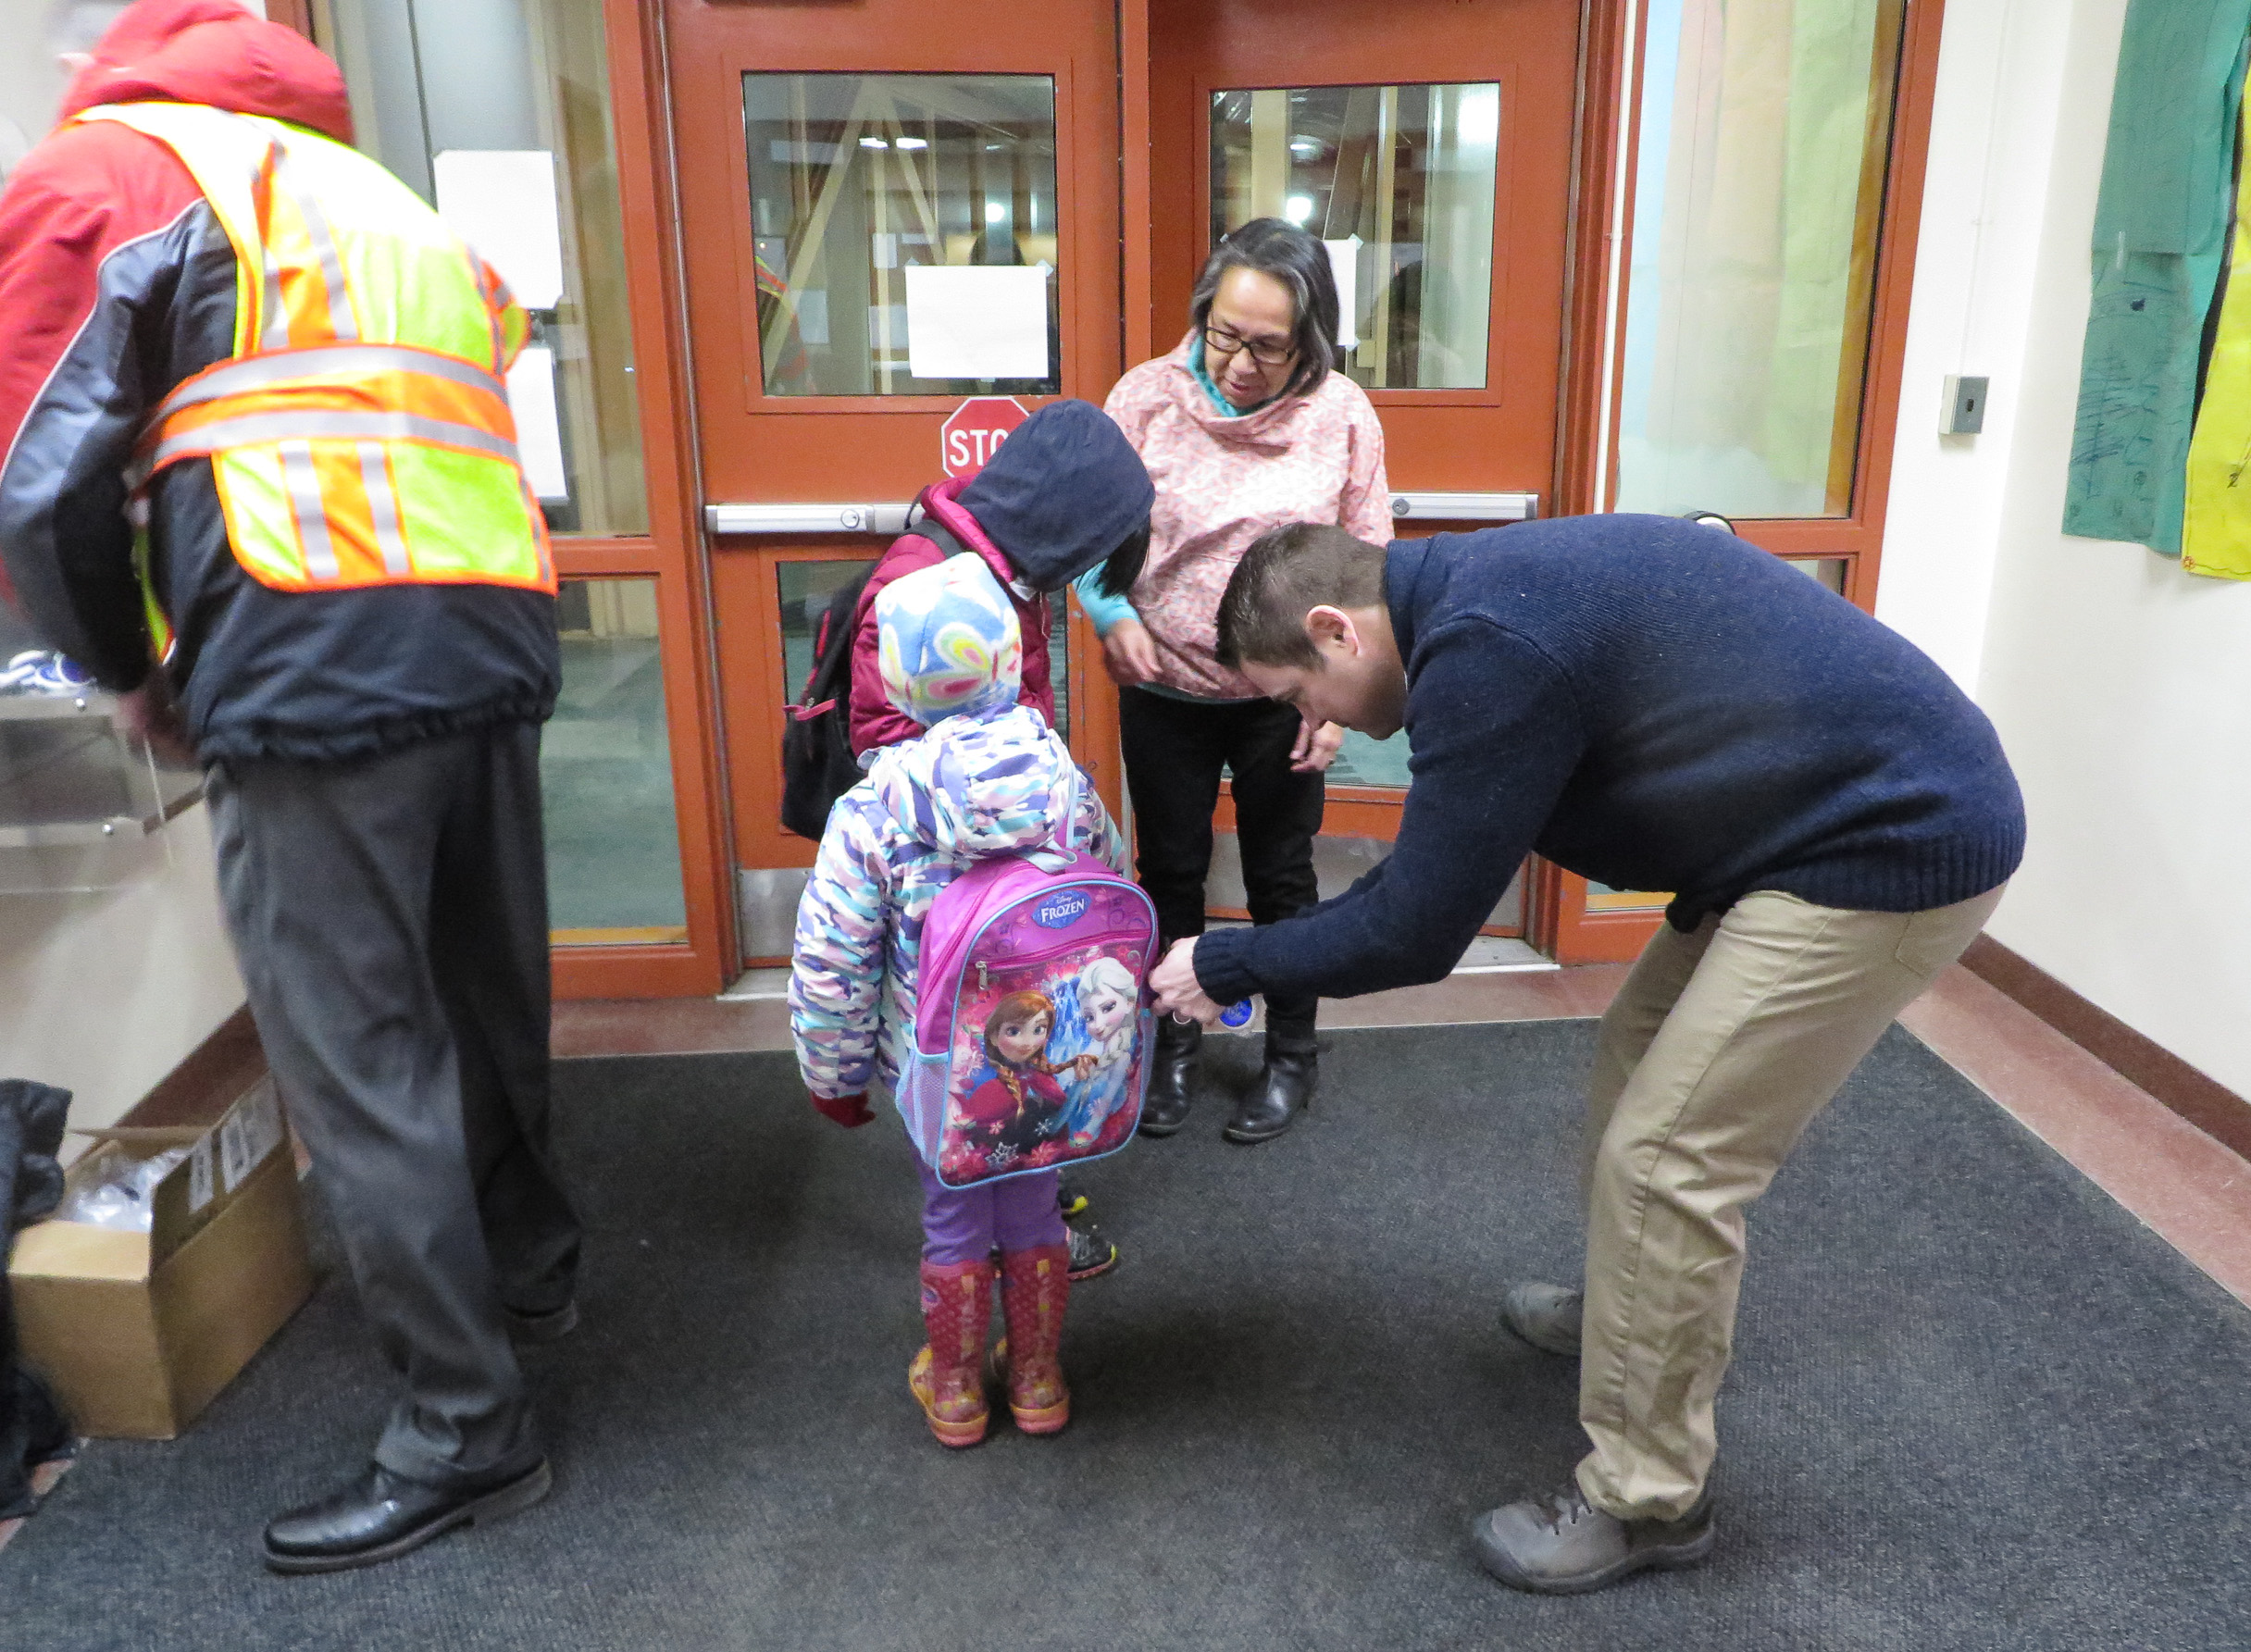 Superintendent Shawn Arnold helps a student attach a reflector keychain to her backpack. Photo: Laura Kraegel, KNOM.